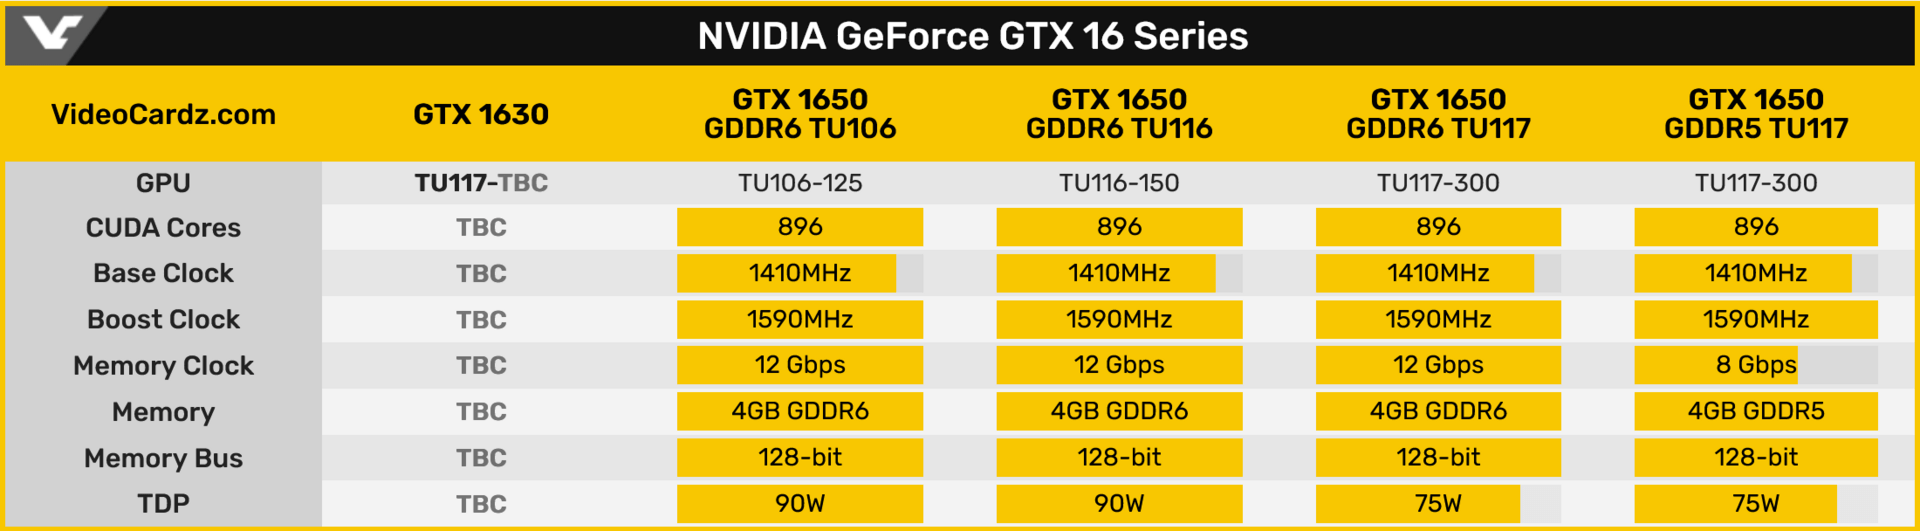 The GeForce GTX 1630 is said to be based on the TU117